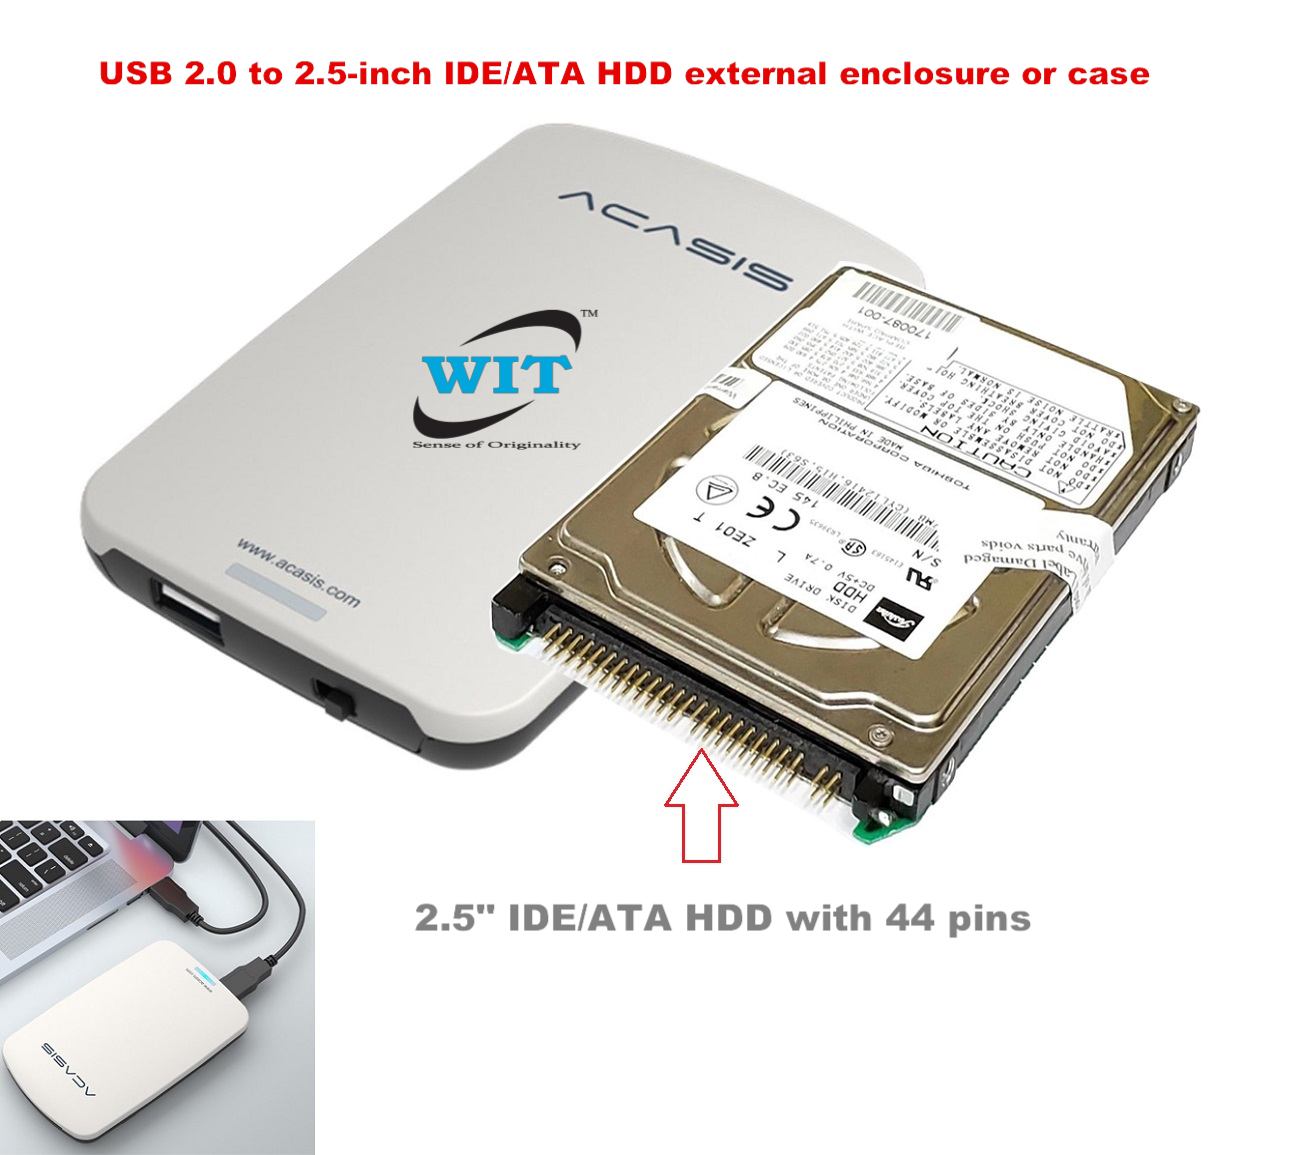 USB 2.0 to 2.5-inch IDE/ATA HDD external enclosure case (HDD - WIT